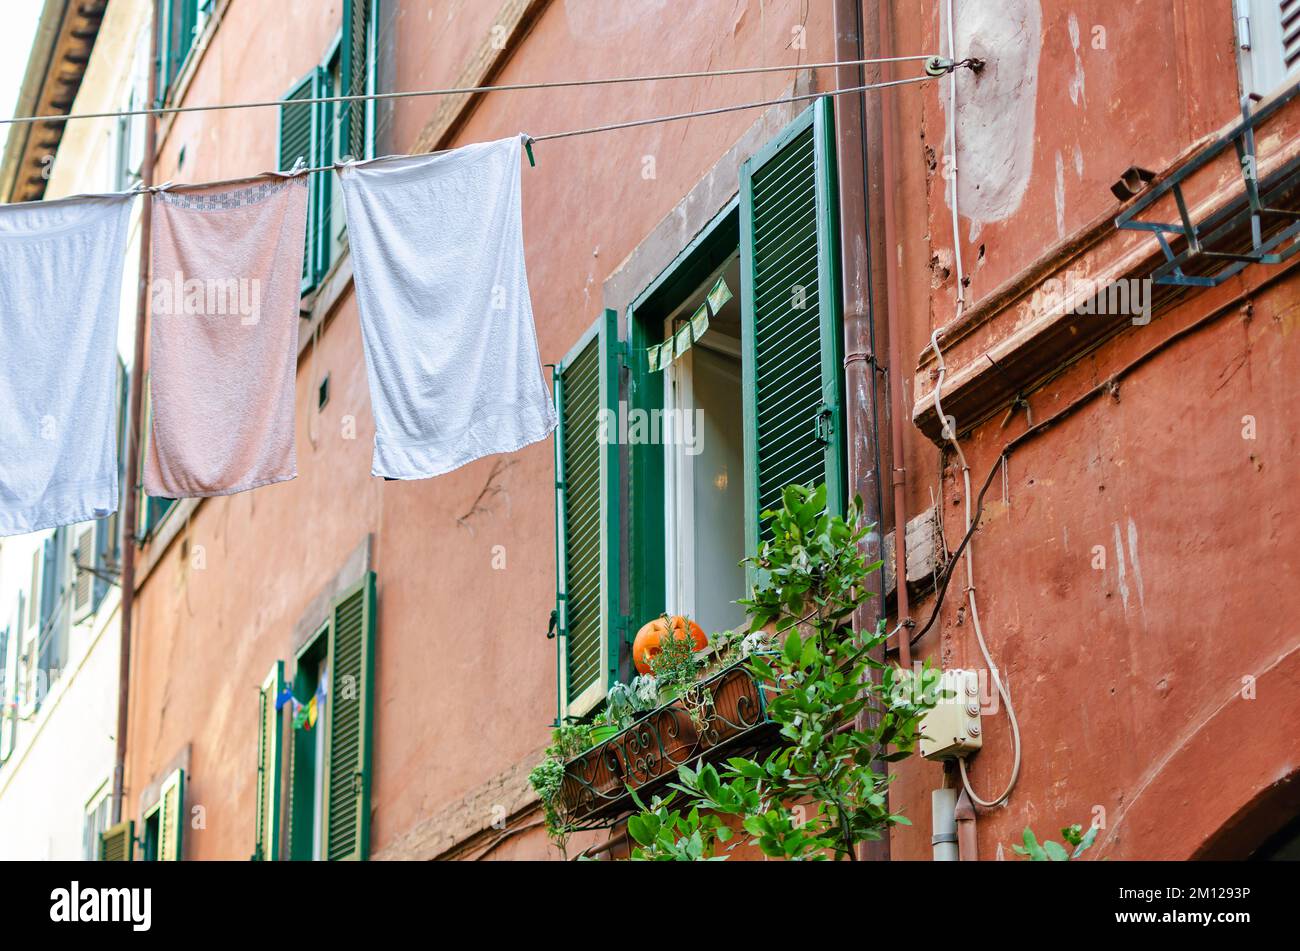 Window in Trastevere, Rome, Italy.  Hanging clothes Stock Photo